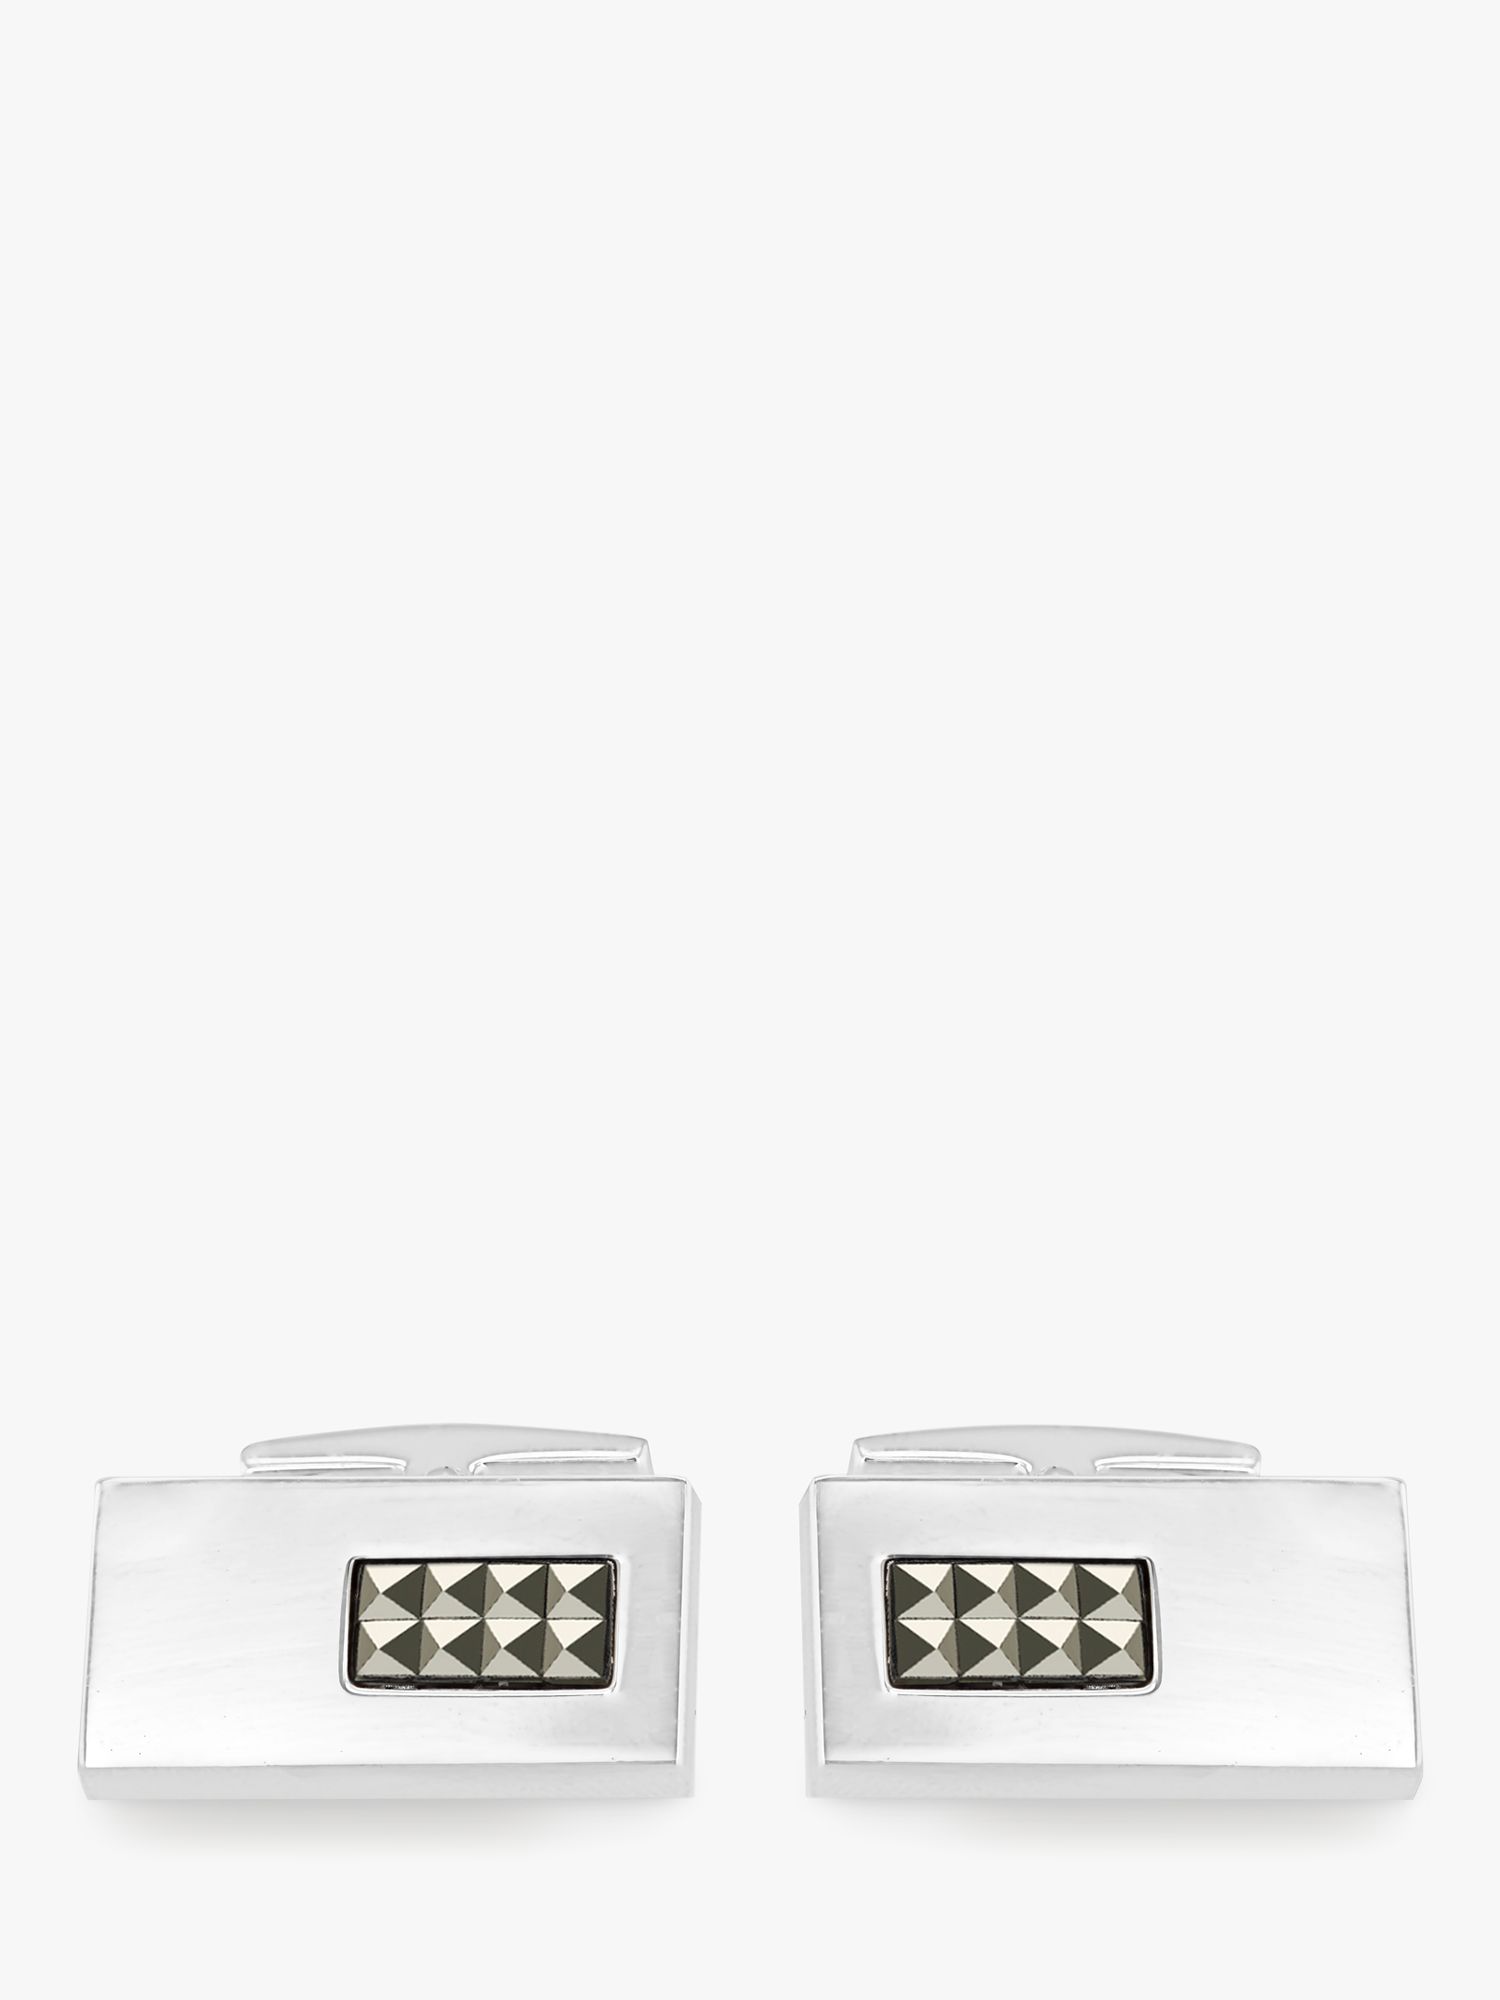 Buy Hoxton London Pyramid Marcasite Set Rectangle Cufflinks, Silver Online at johnlewis.com